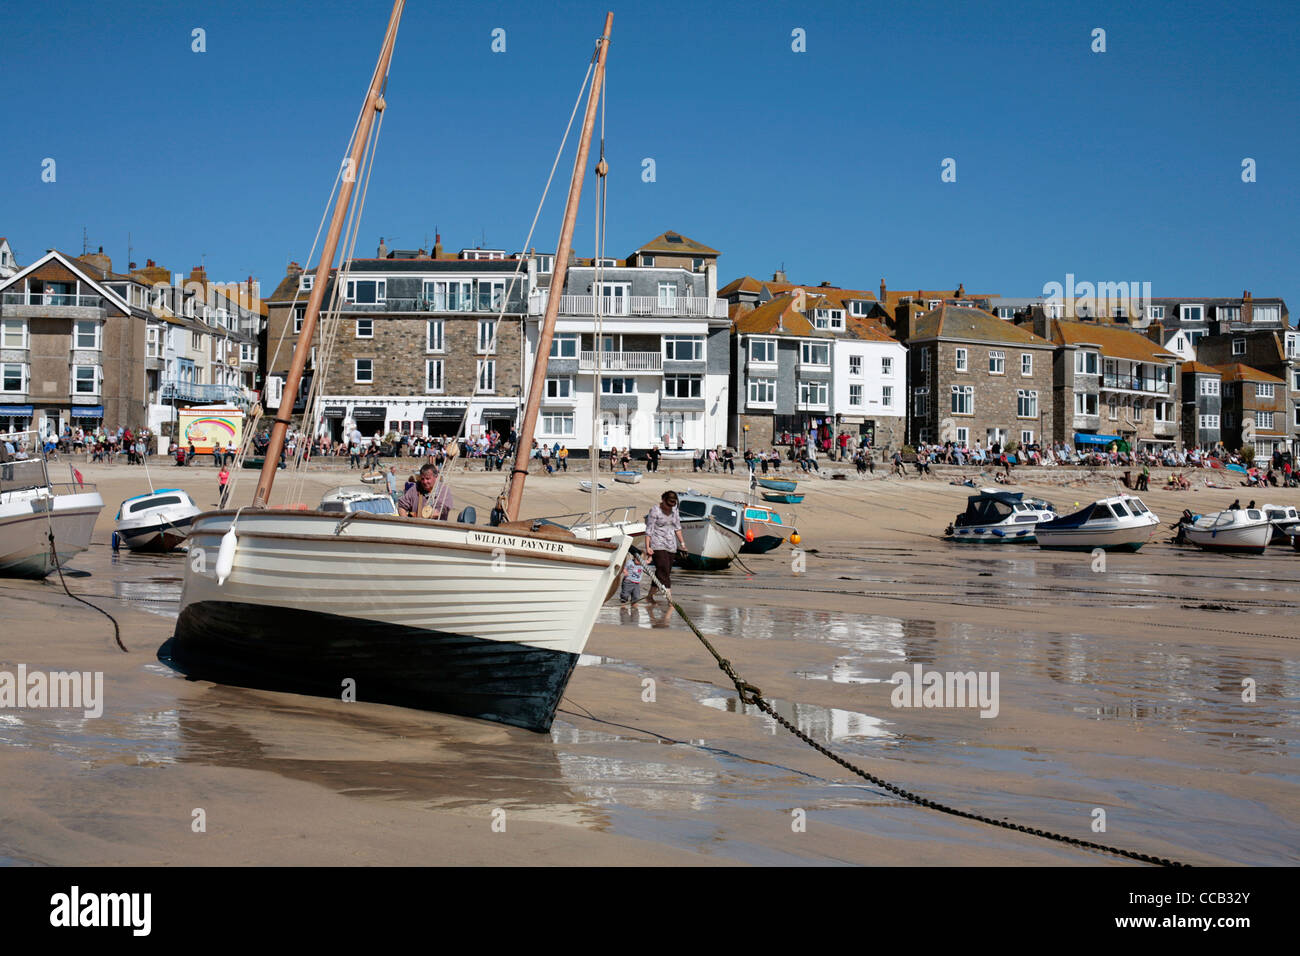 St Ives 'Jumbo' traditional wooden fishing boat in St Ives UK. Stock Photo